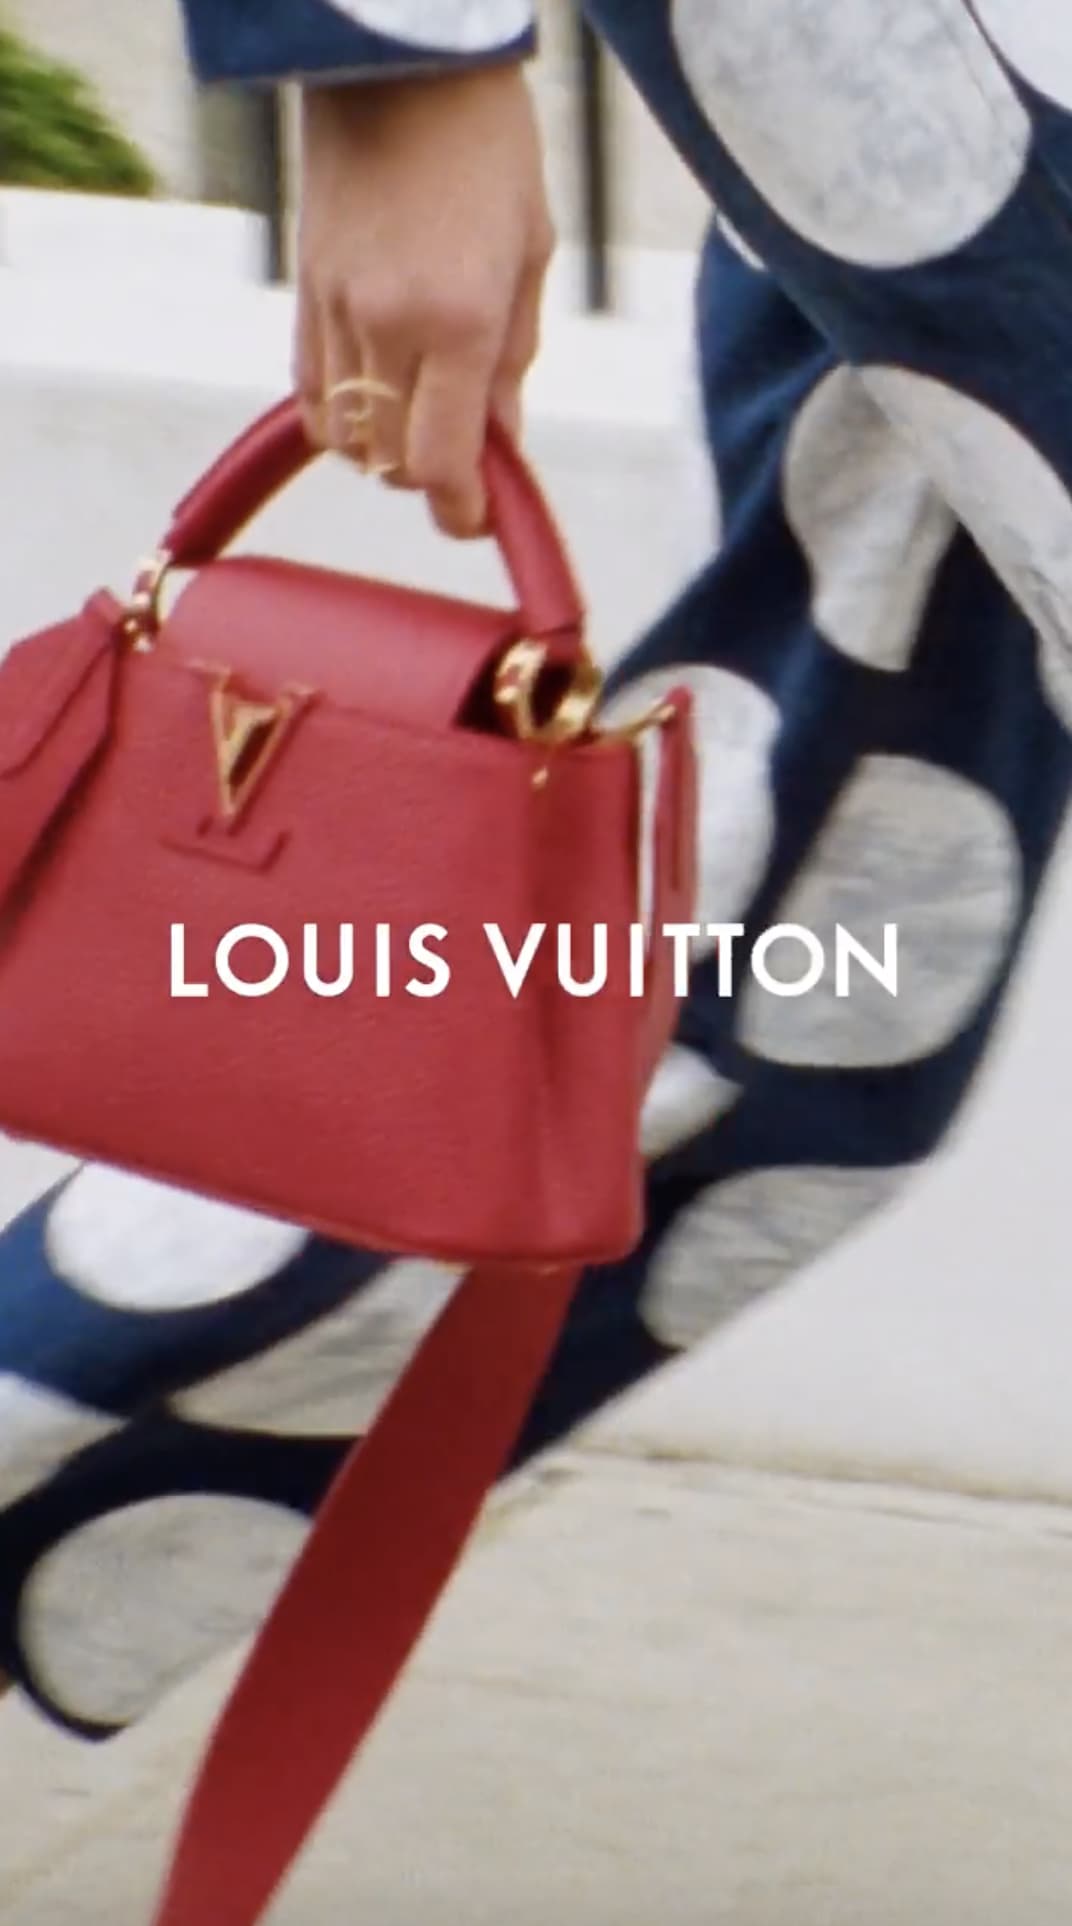 Louis Vuitton Cruise 2016 Ad Campaign Featuring New Capucines Bag